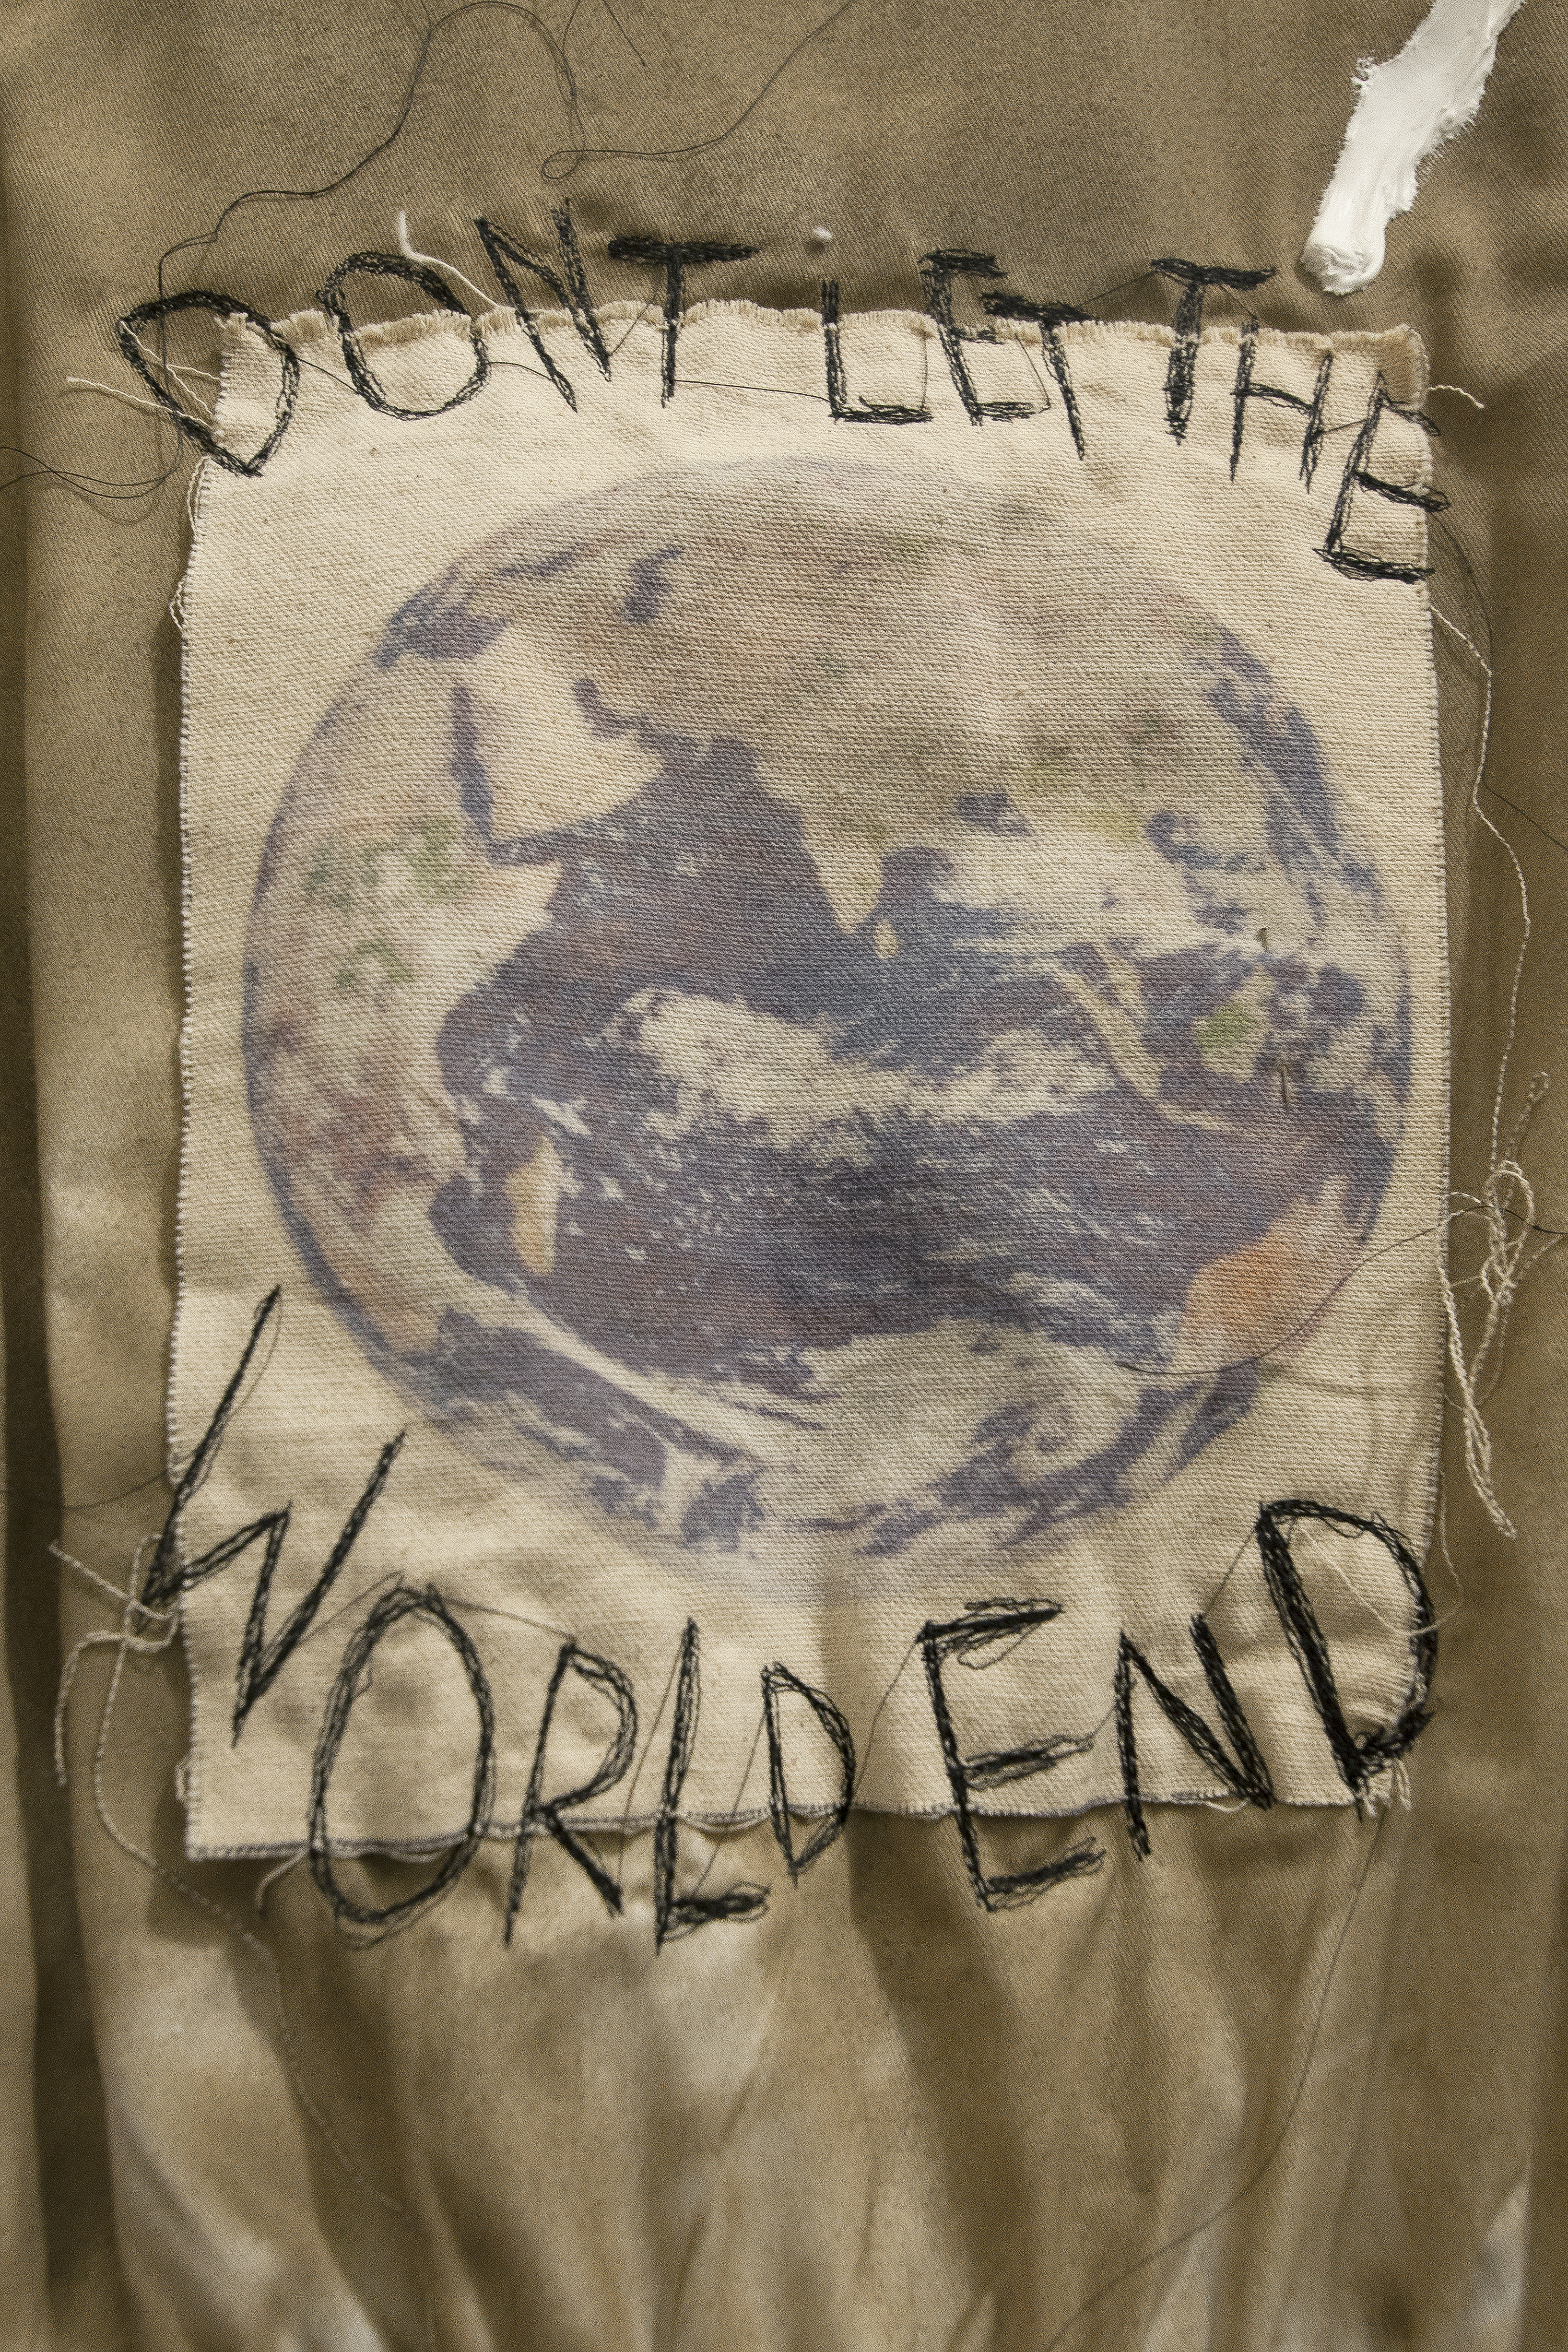 Detail of a patch with a print of the world on it sewn onto the back of a cream jumpsuit